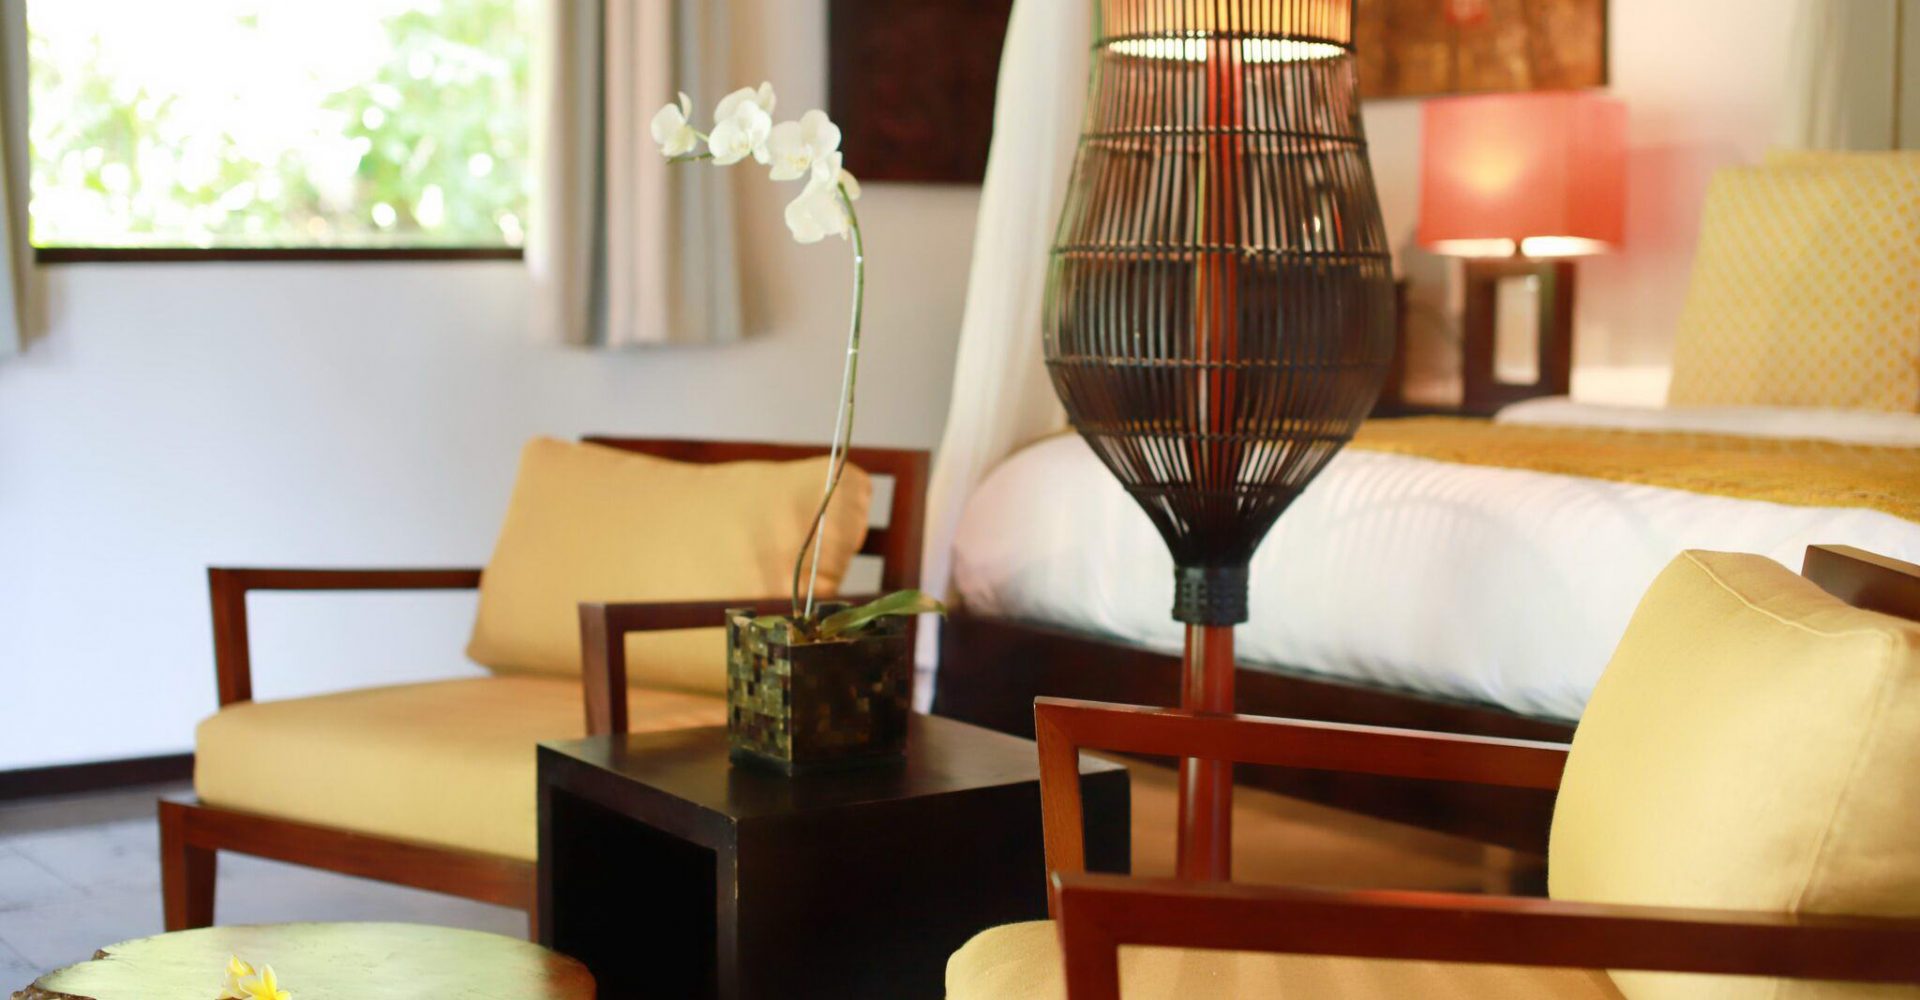 The seating area with lamp and orchid inside Sukavati's one bedroom luxury villa ‘White Tara'.